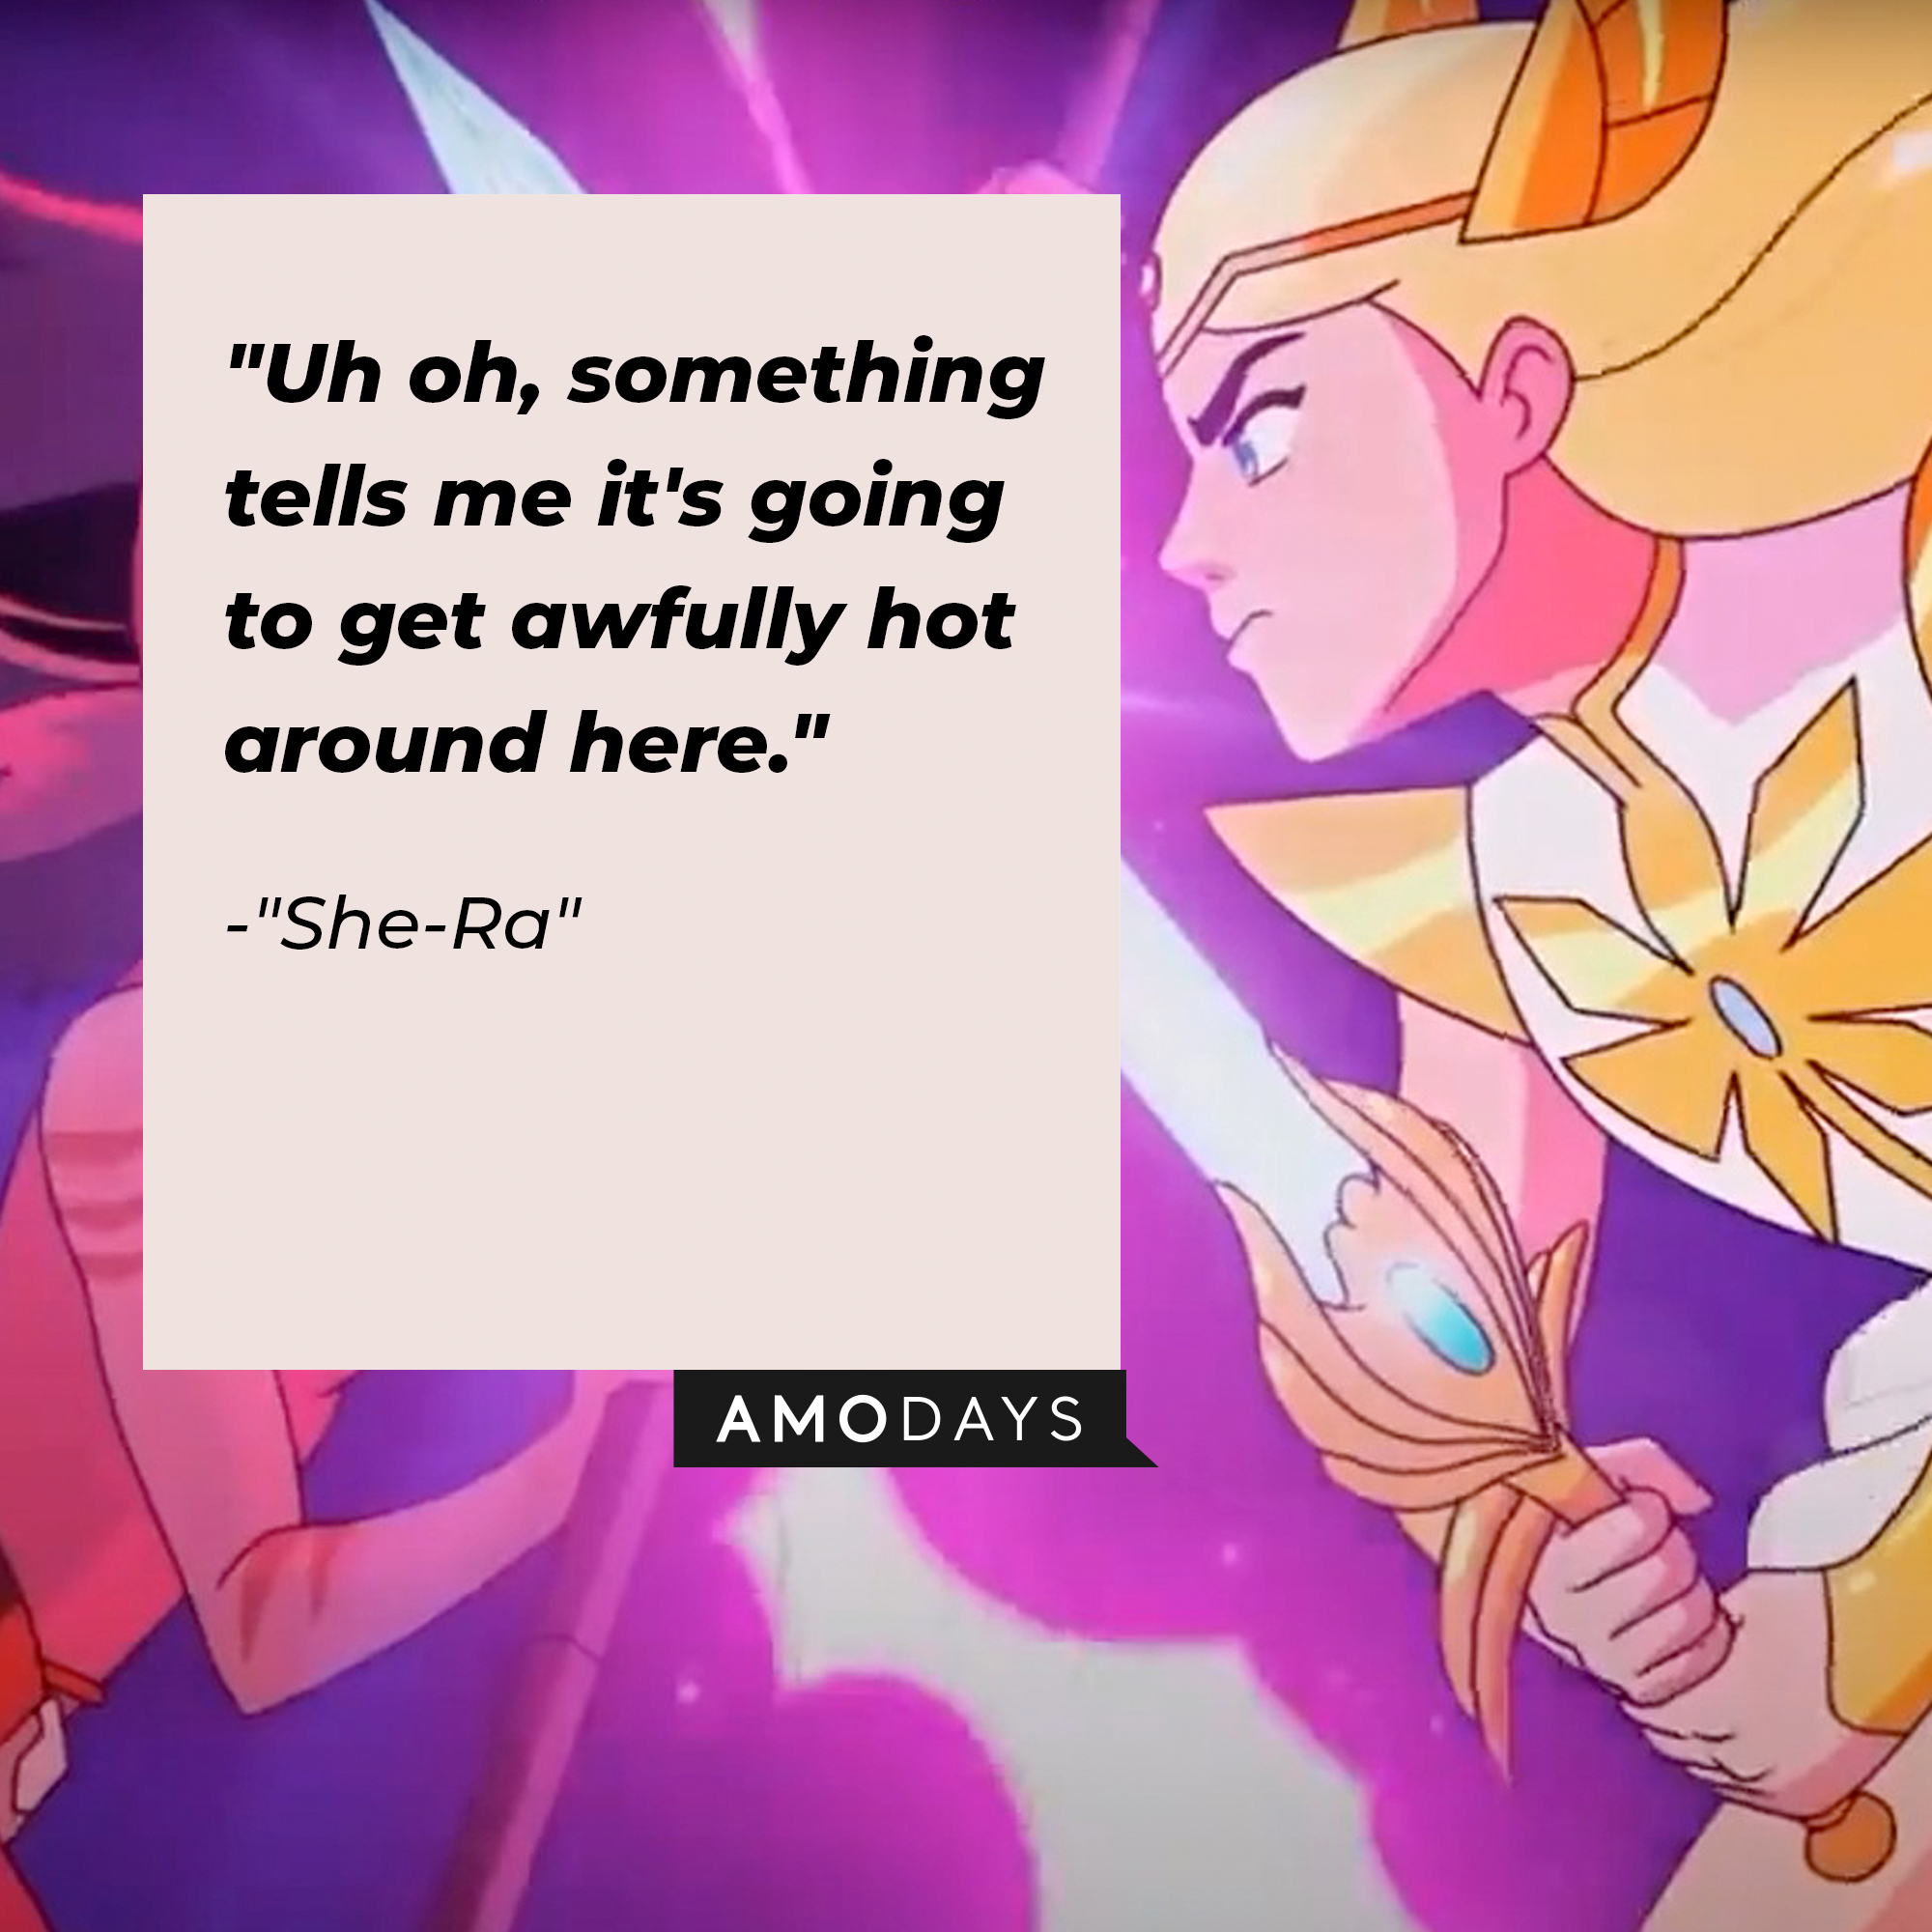 "She-Ra's" quote: "Uh oh, something tells me it's going to get awfully hot around here." | Source: Facebook.com/DreamWorksSheRa